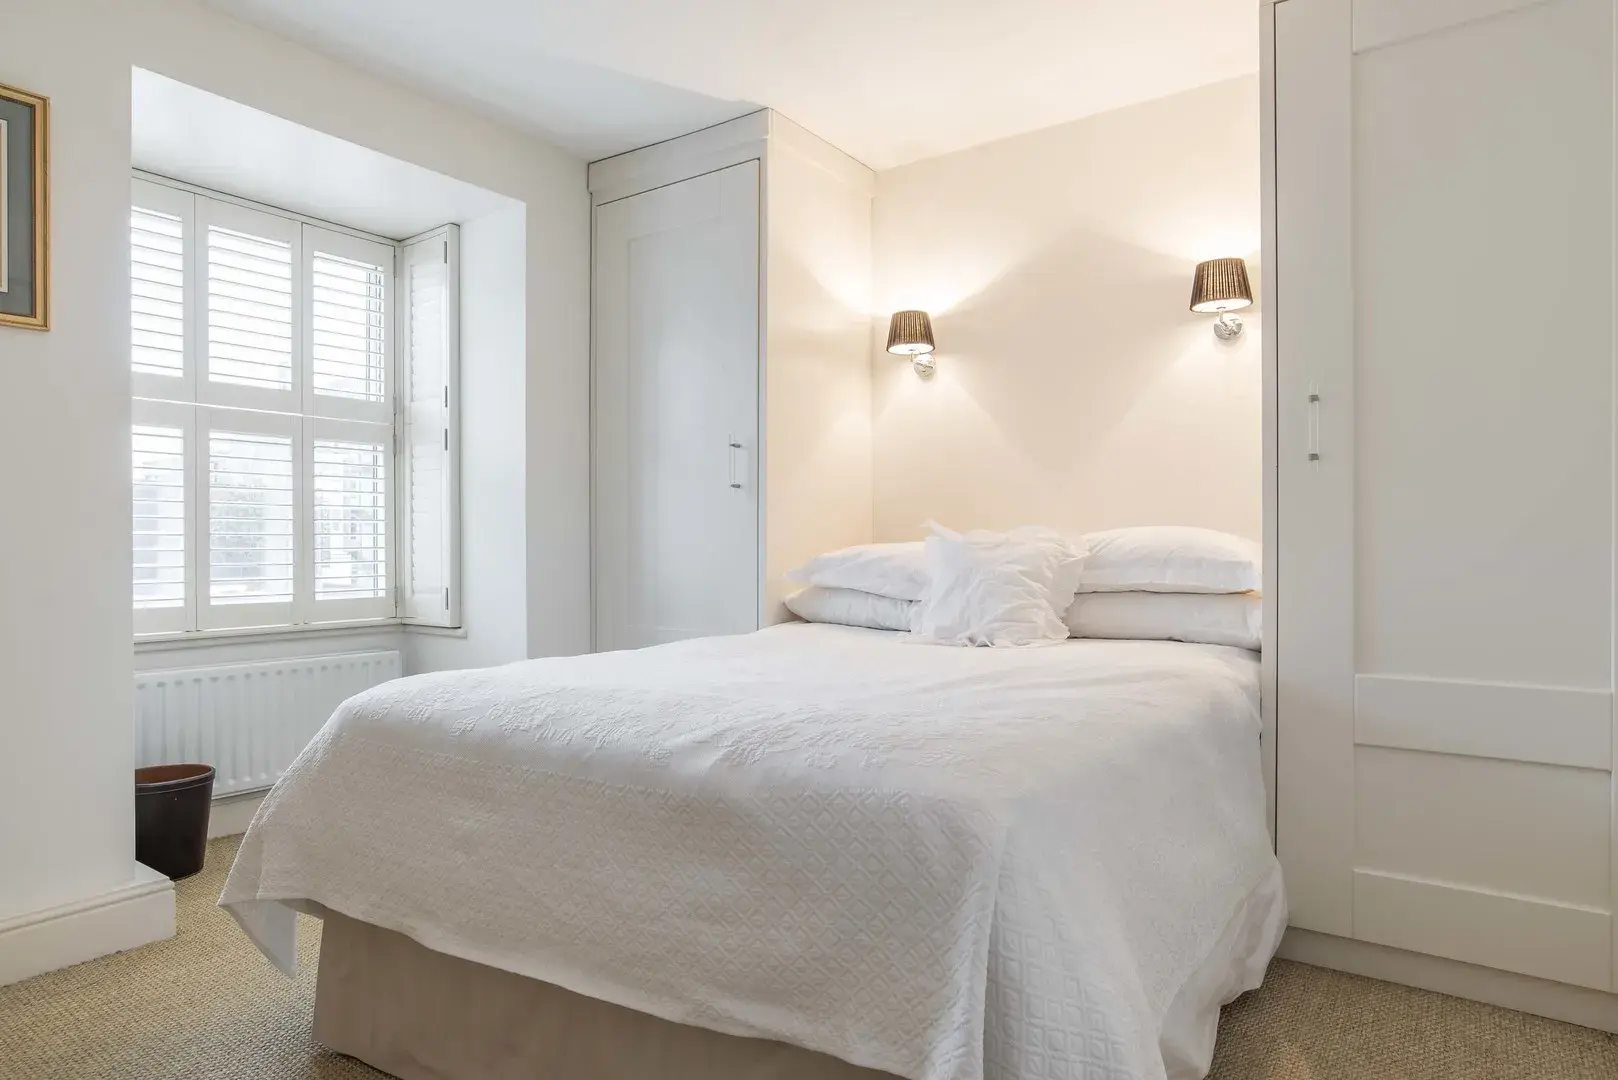 Lots Road II, holiday home in Chelsea, London